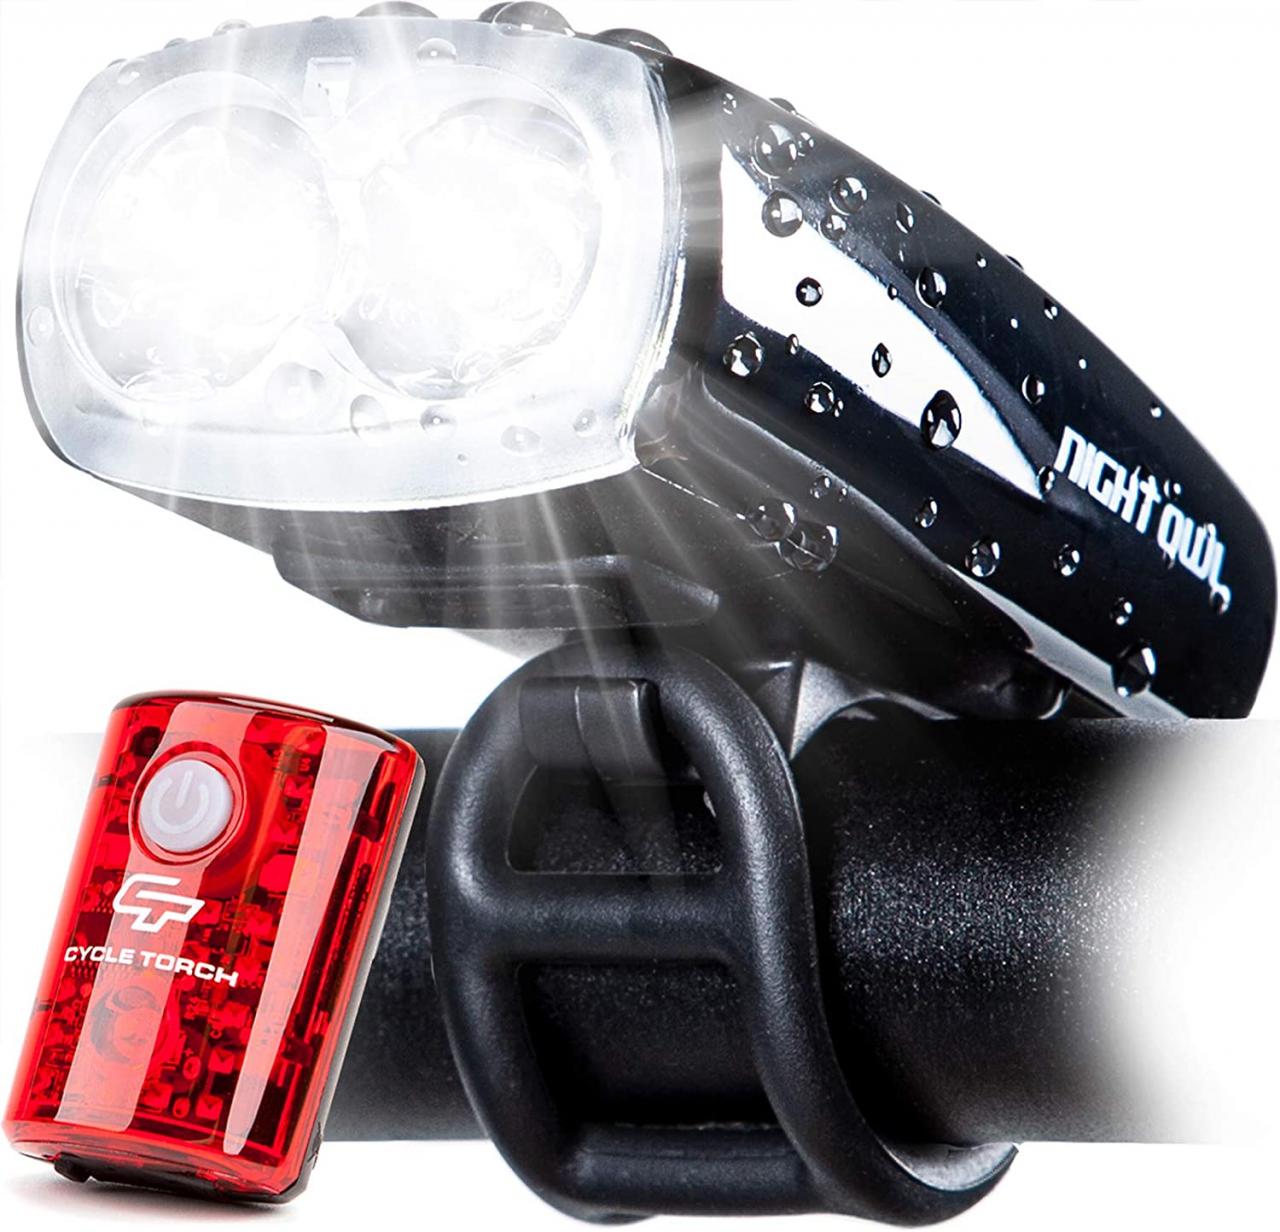 Cycle Torch Bolt Combo - USB Rechargeable Bike Light Front and Back| Safety  Bicycle LED Headlight & Rear Tail Light | Bike Lights Set, Easy to Install  for Men Women Kids (2